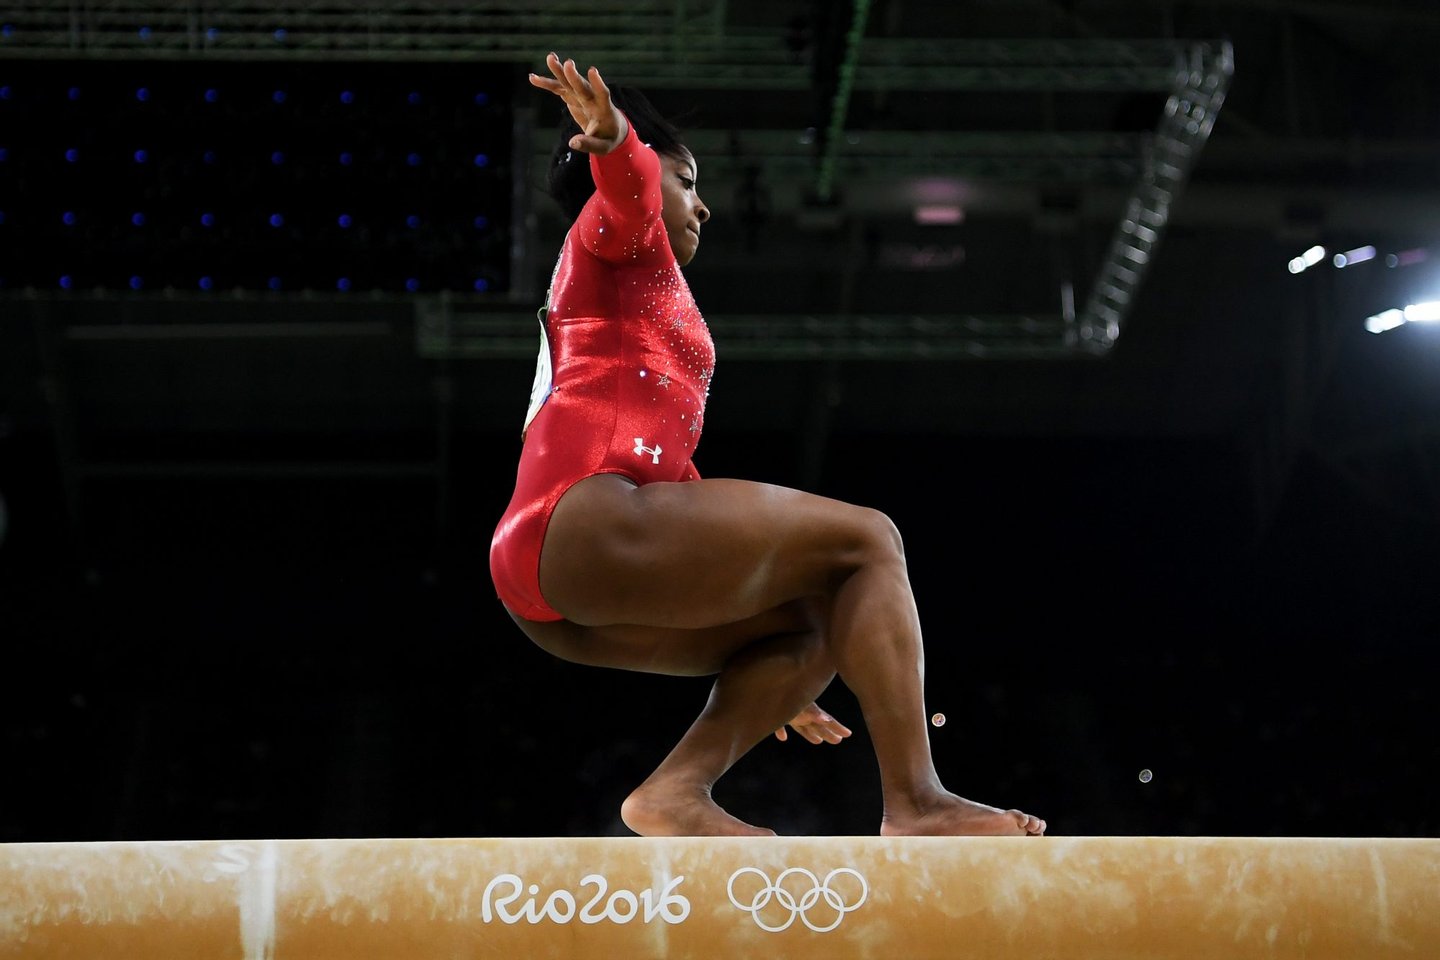 RIO DE JANEIRO, BRAZIL - AUGUST 15: Simone Biles of the United States slips while competing in the Balance Beam Final on day 10 of the Rio 2016 Olympic Games at Rio Olympic Arena on August 15, 2016 in Rio de Janeiro, Brazil. (Photo by Laurence Griffiths/Getty Images)